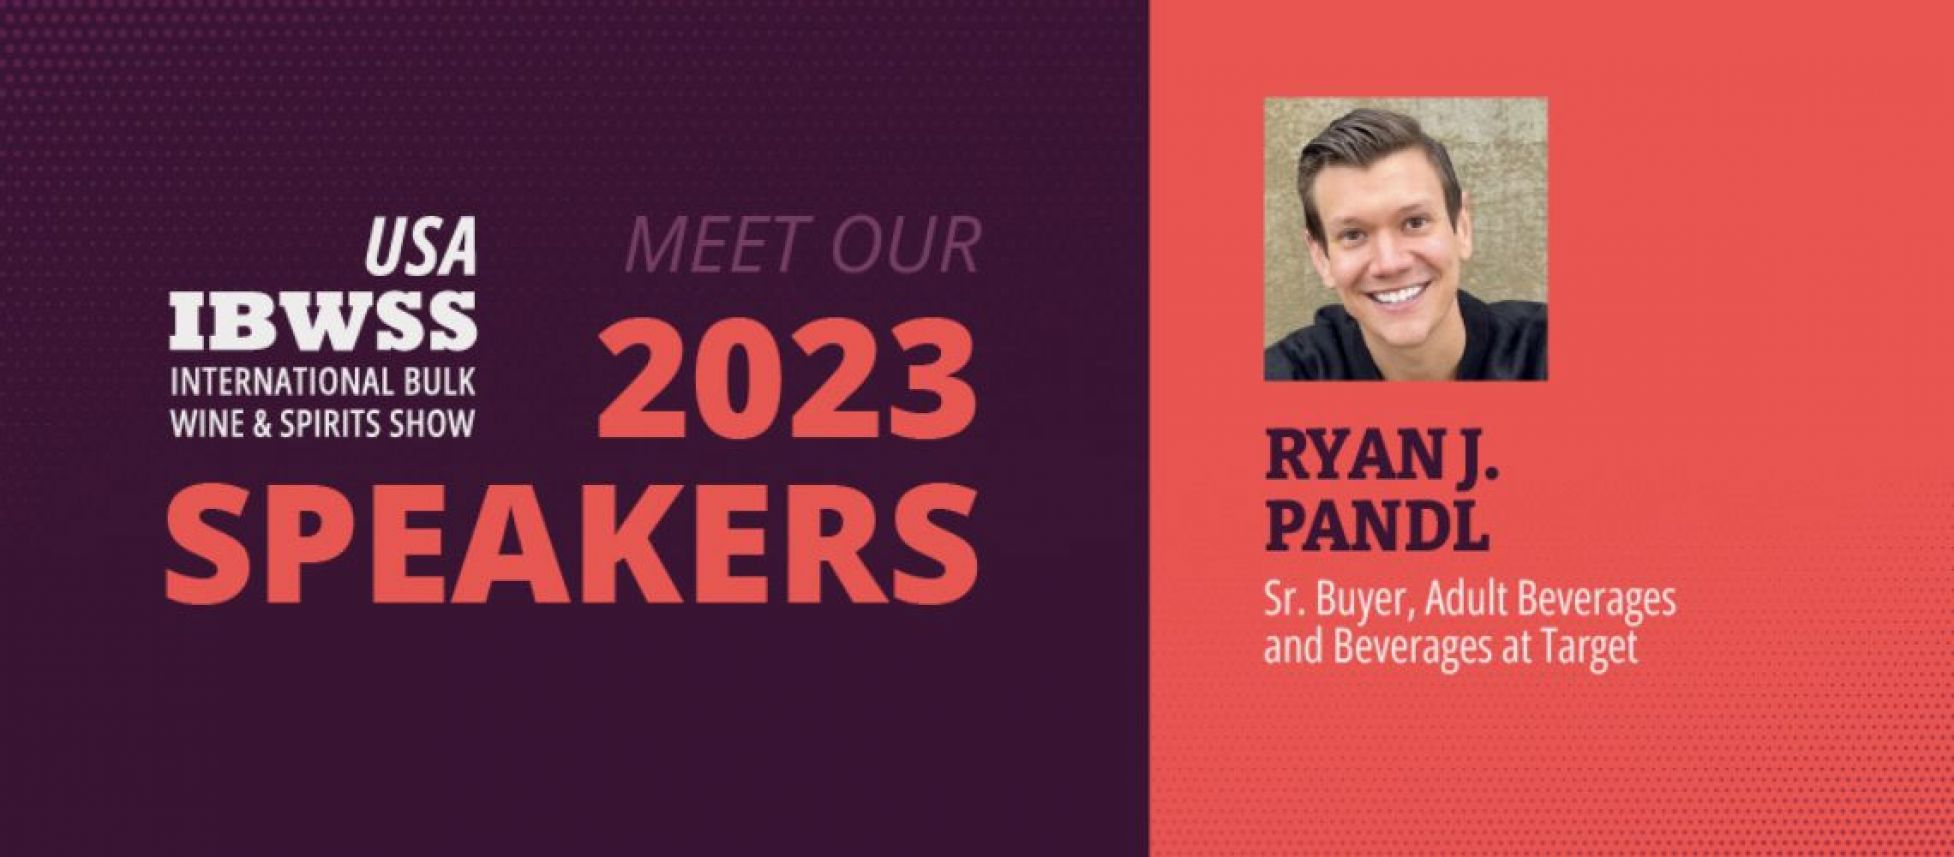 Photo for: Ryan Pandl, Senior Buyer, Adult Beverages and Beverages at Target To Speak At IBWSS 2023